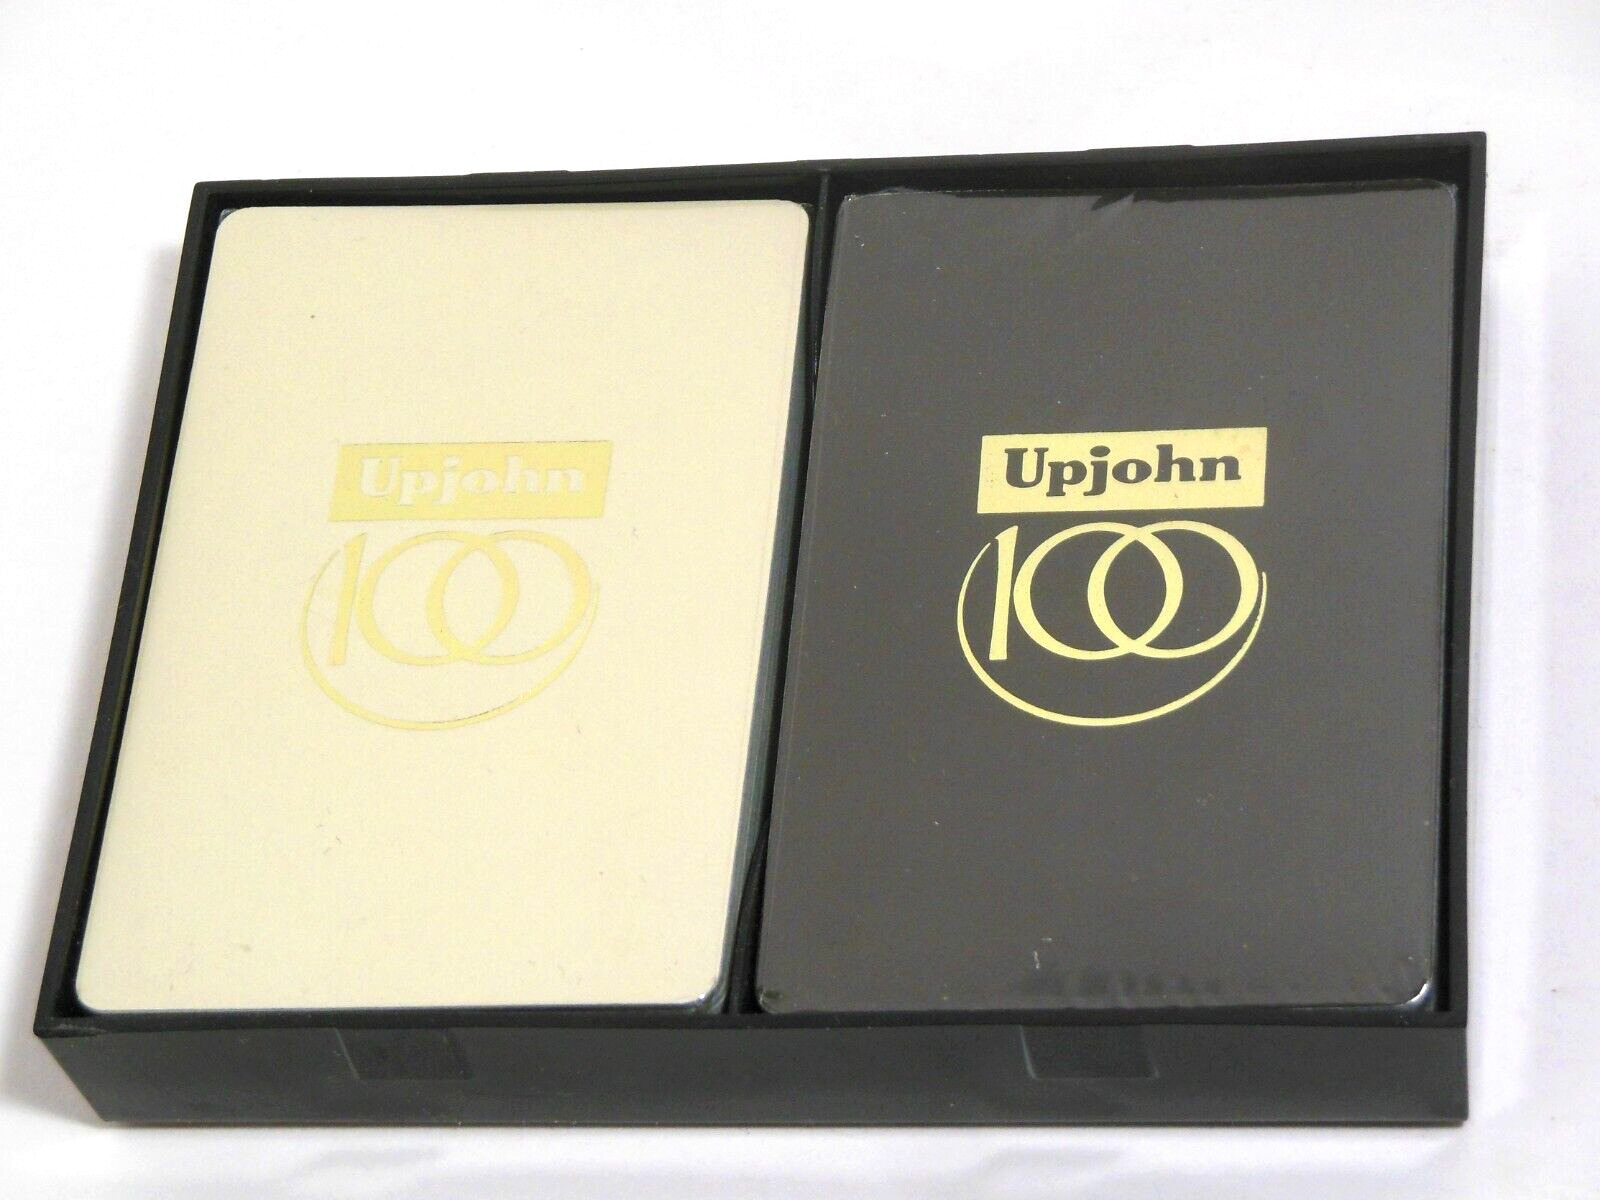 New UPJOHN Pharmaceutical Company Playing Cards 100th Anniversary Two Decks 1986